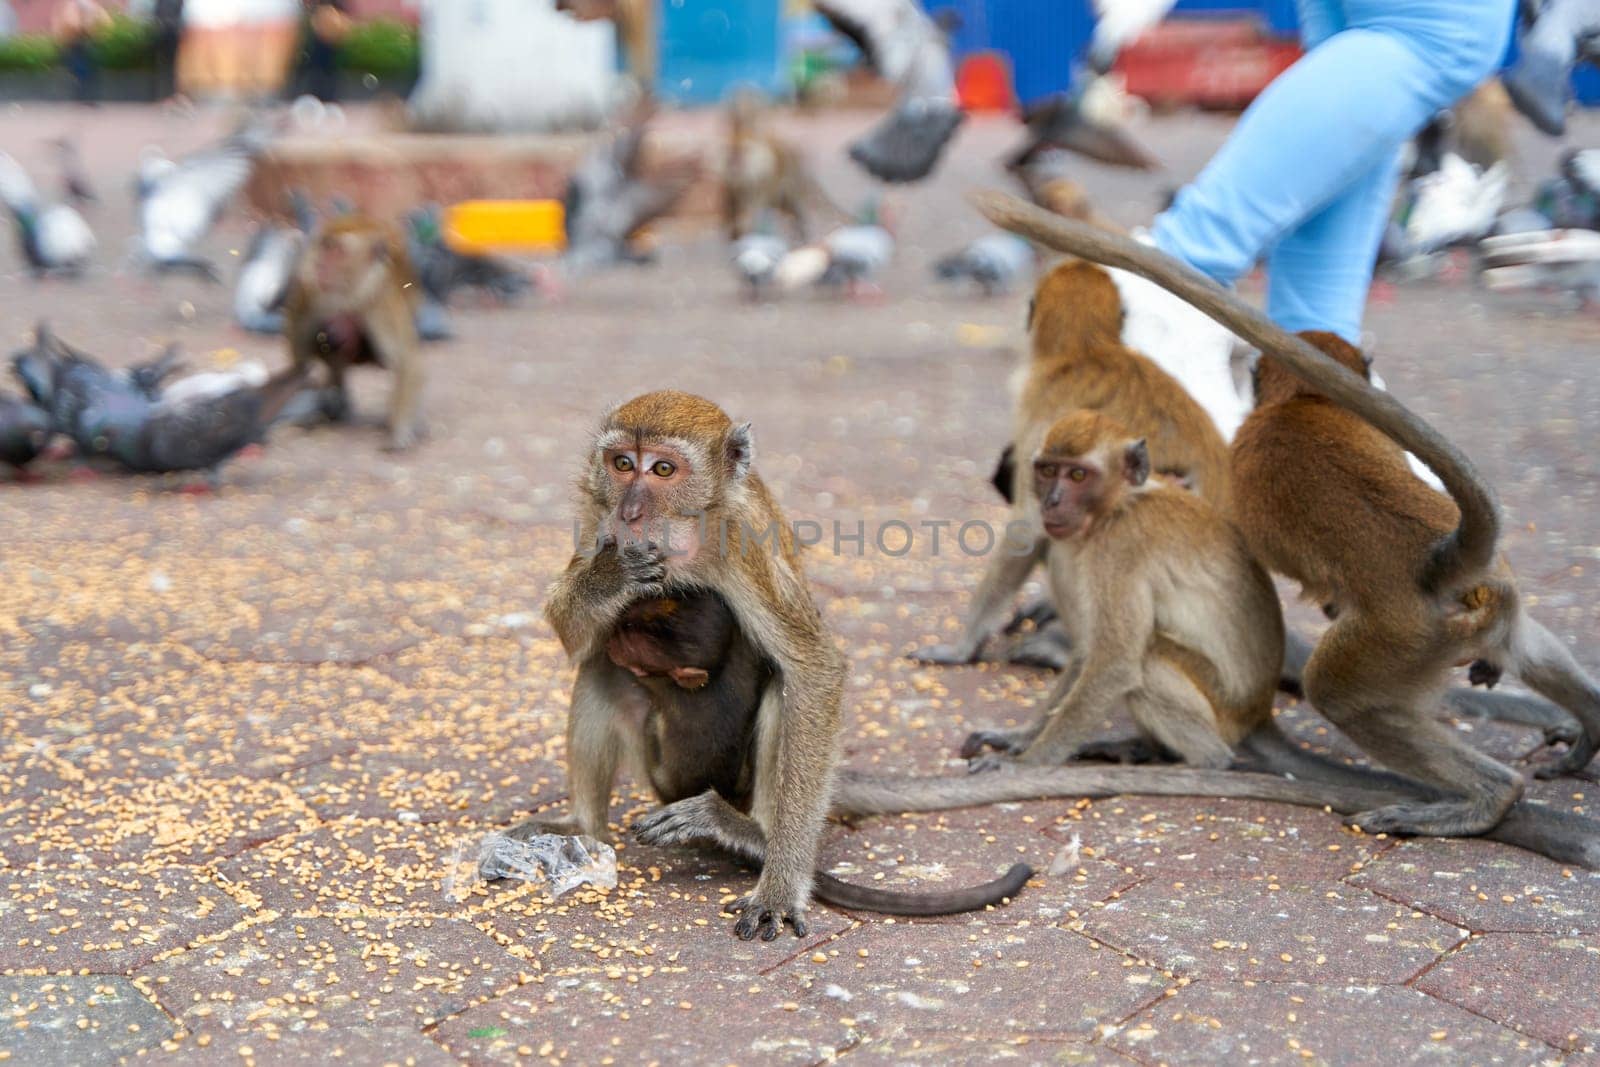 Wild monkeys at the entrance to the Batu Caves take food from the pigeons that visitors feed by Try_my_best